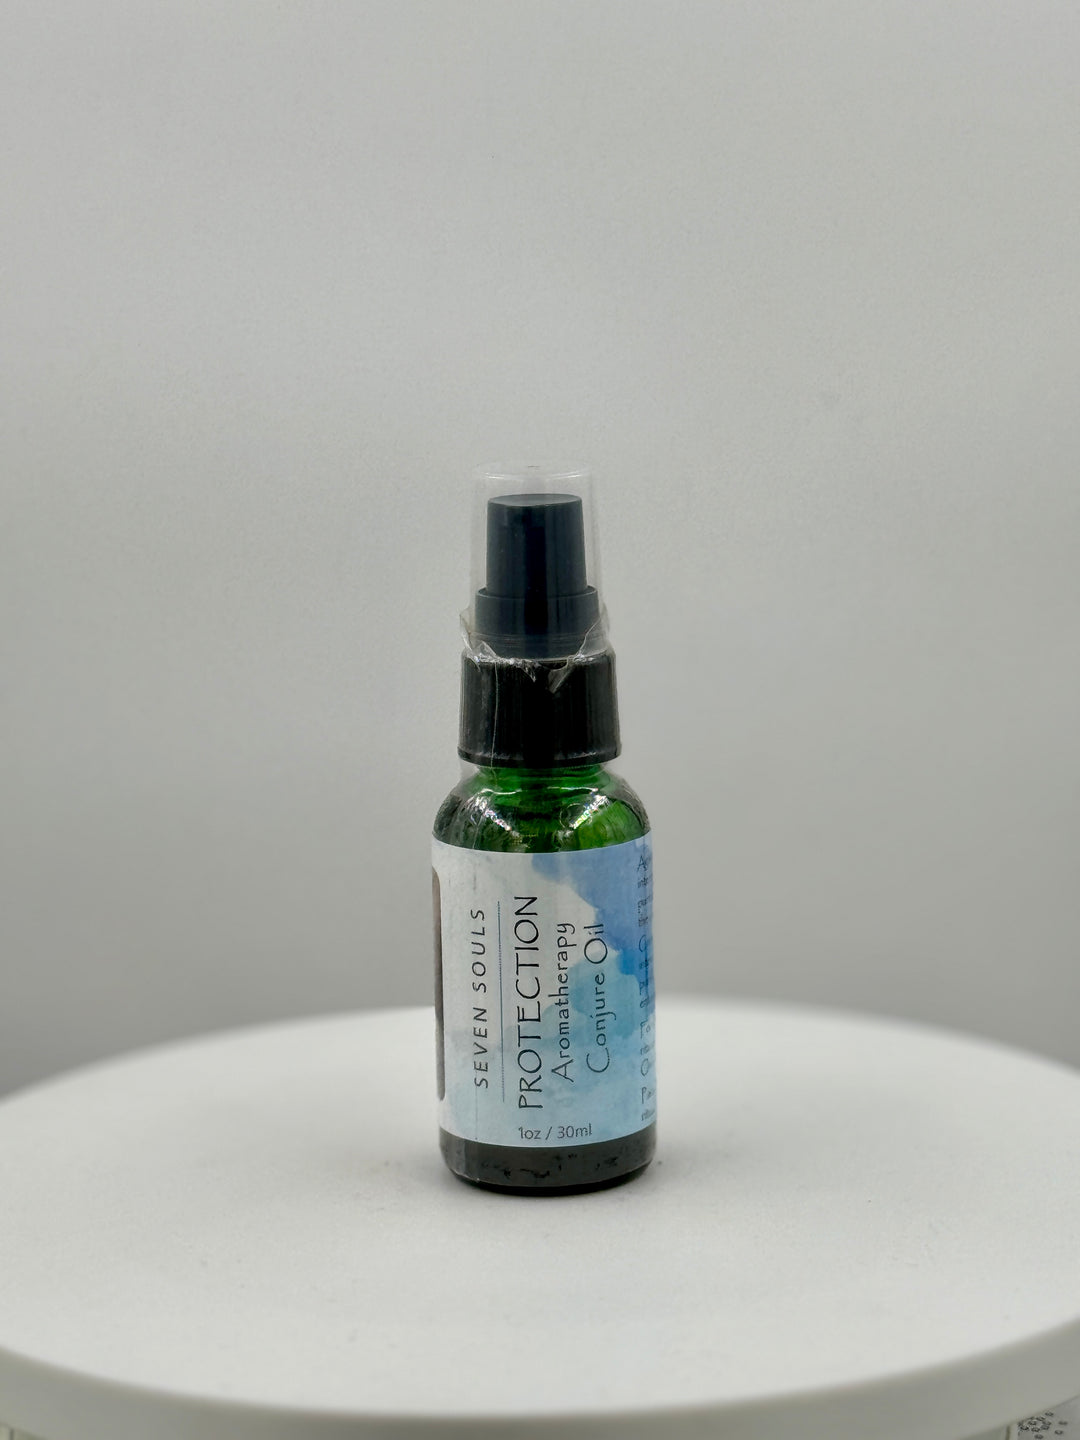 PROTECTION -Aromatheraphy Conjure Oil